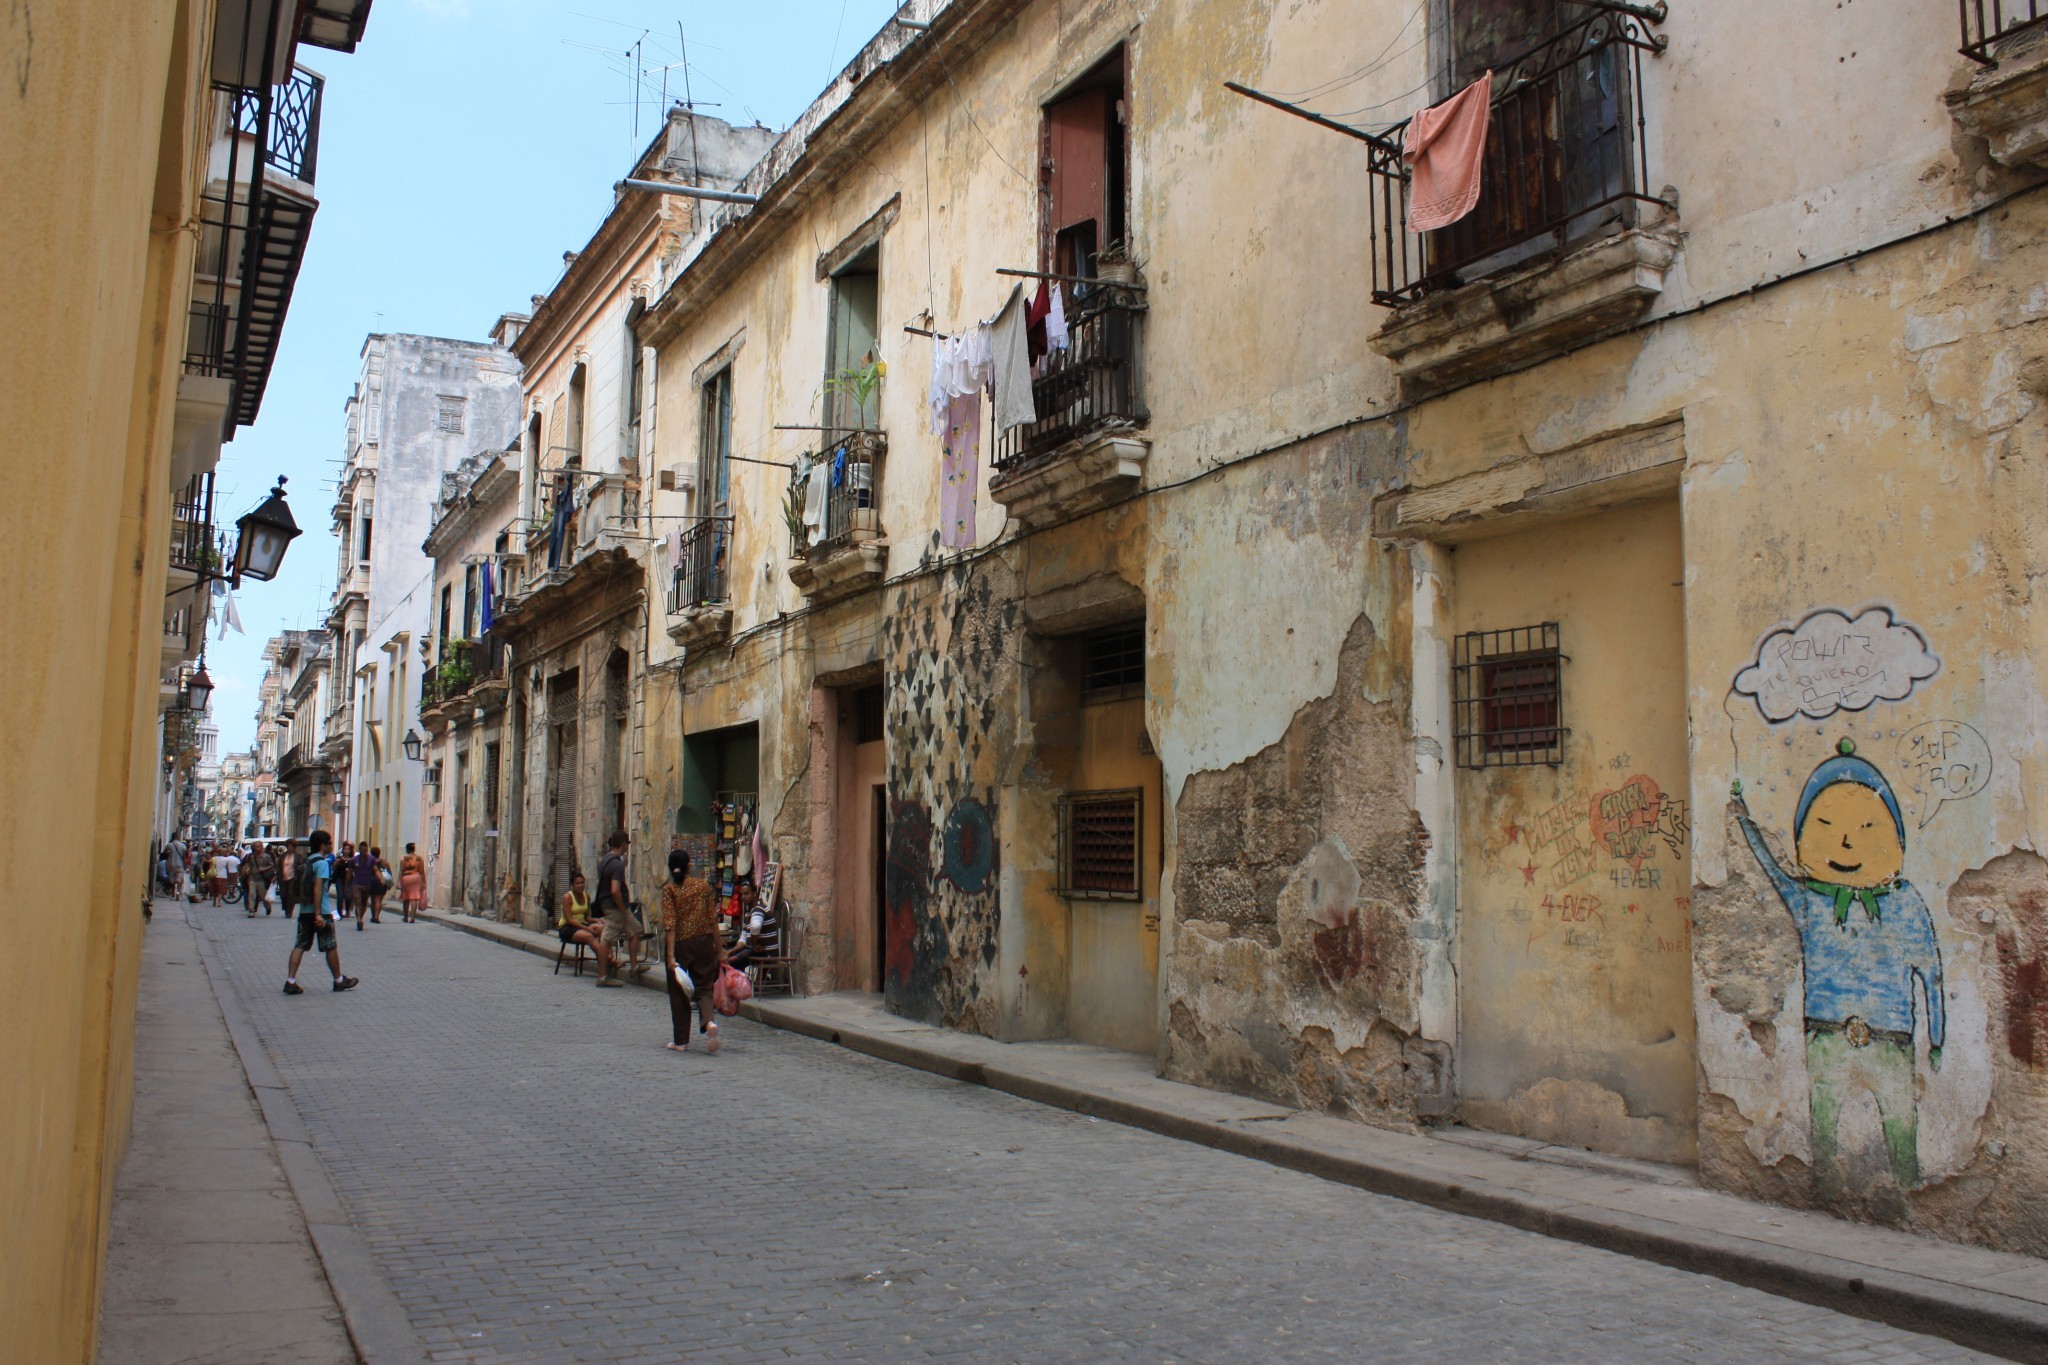 Reform in Cuba: It’s Not about You